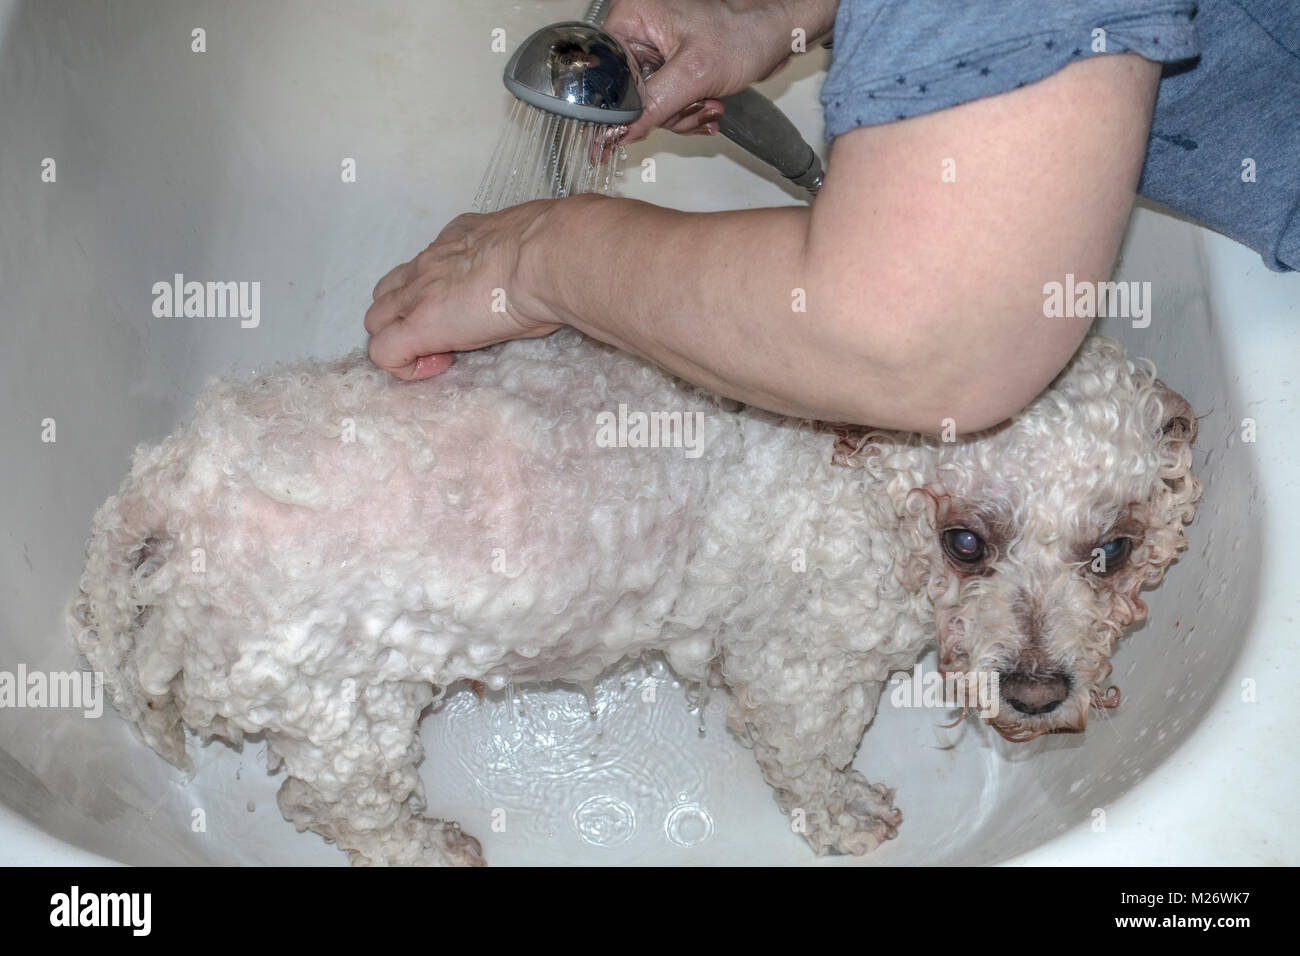 Woman washing her white curly coated, pedigree pet Bichon Frise dog, in a bath tub at home, with warm, soapy water. England, UK. Stock Photo